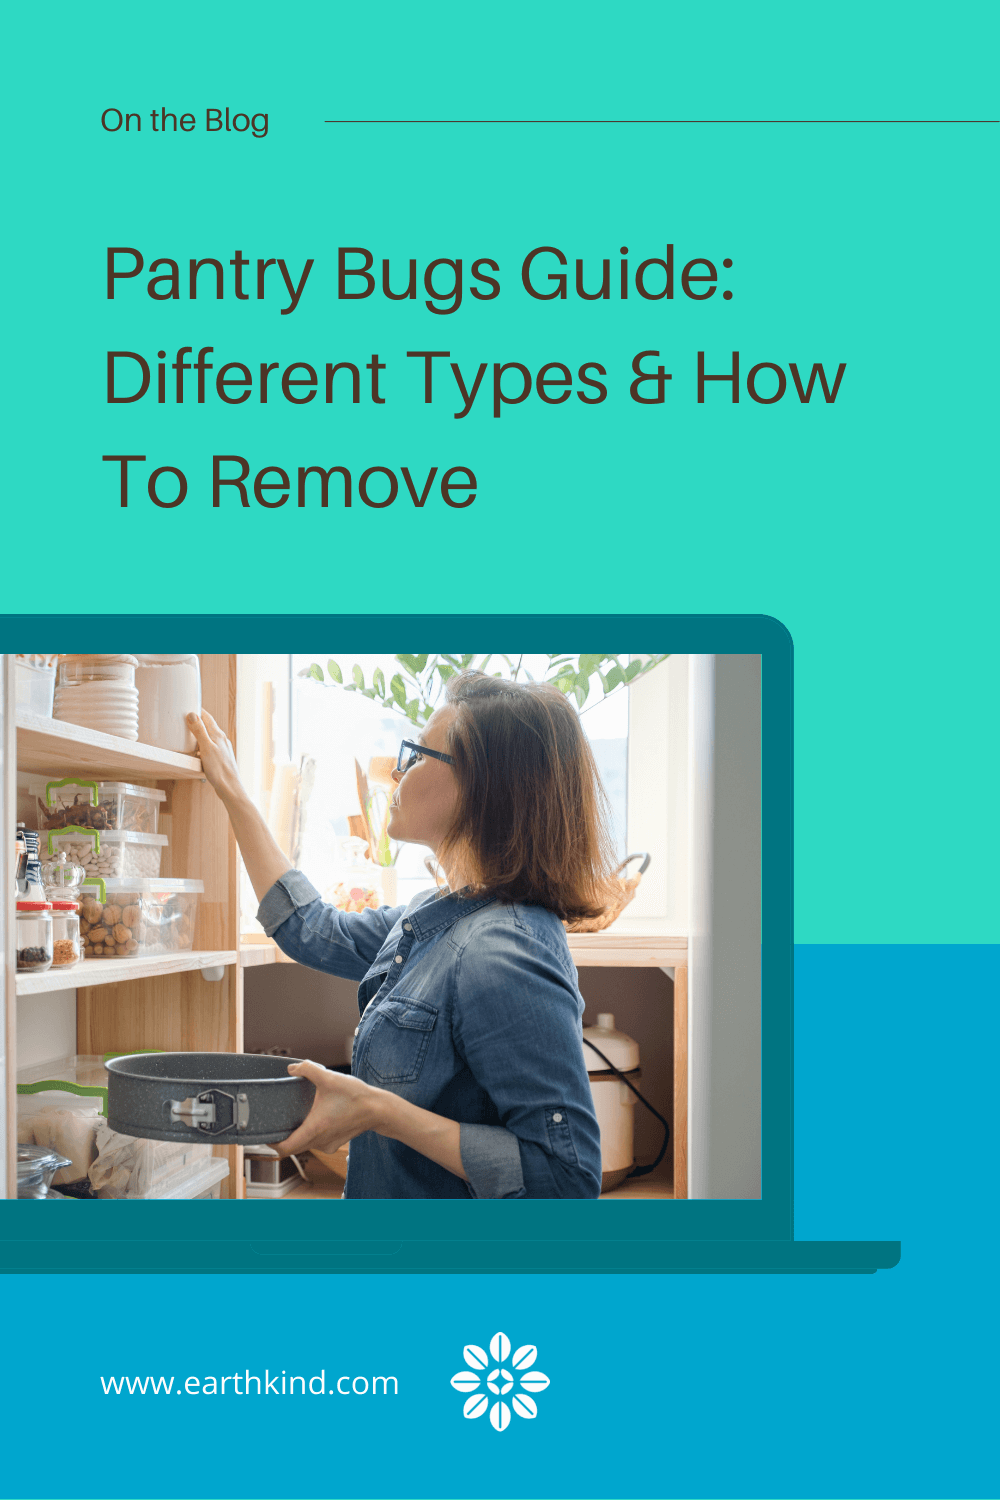 Pantry Bugs Guide: Different Types & How To Remove